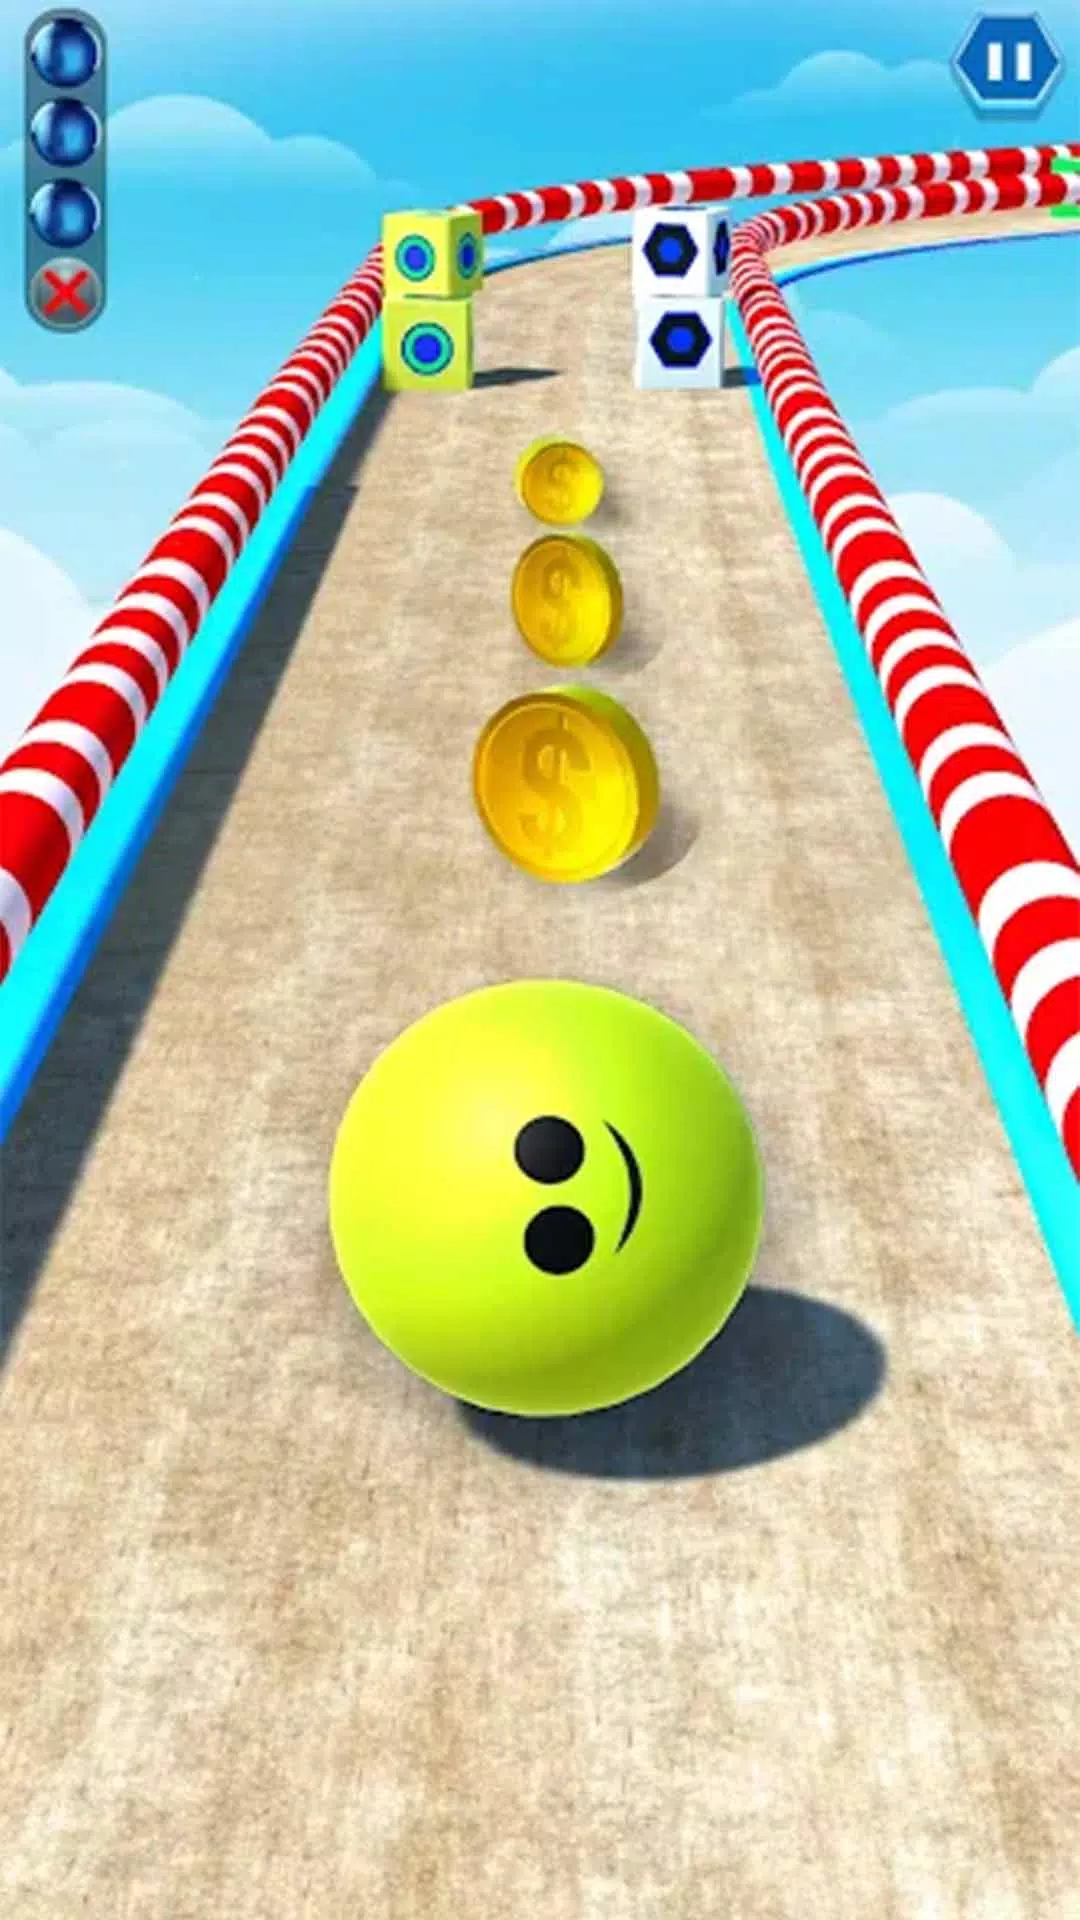 Stream How to Have Fun with Going Balls Game APK on Your Android